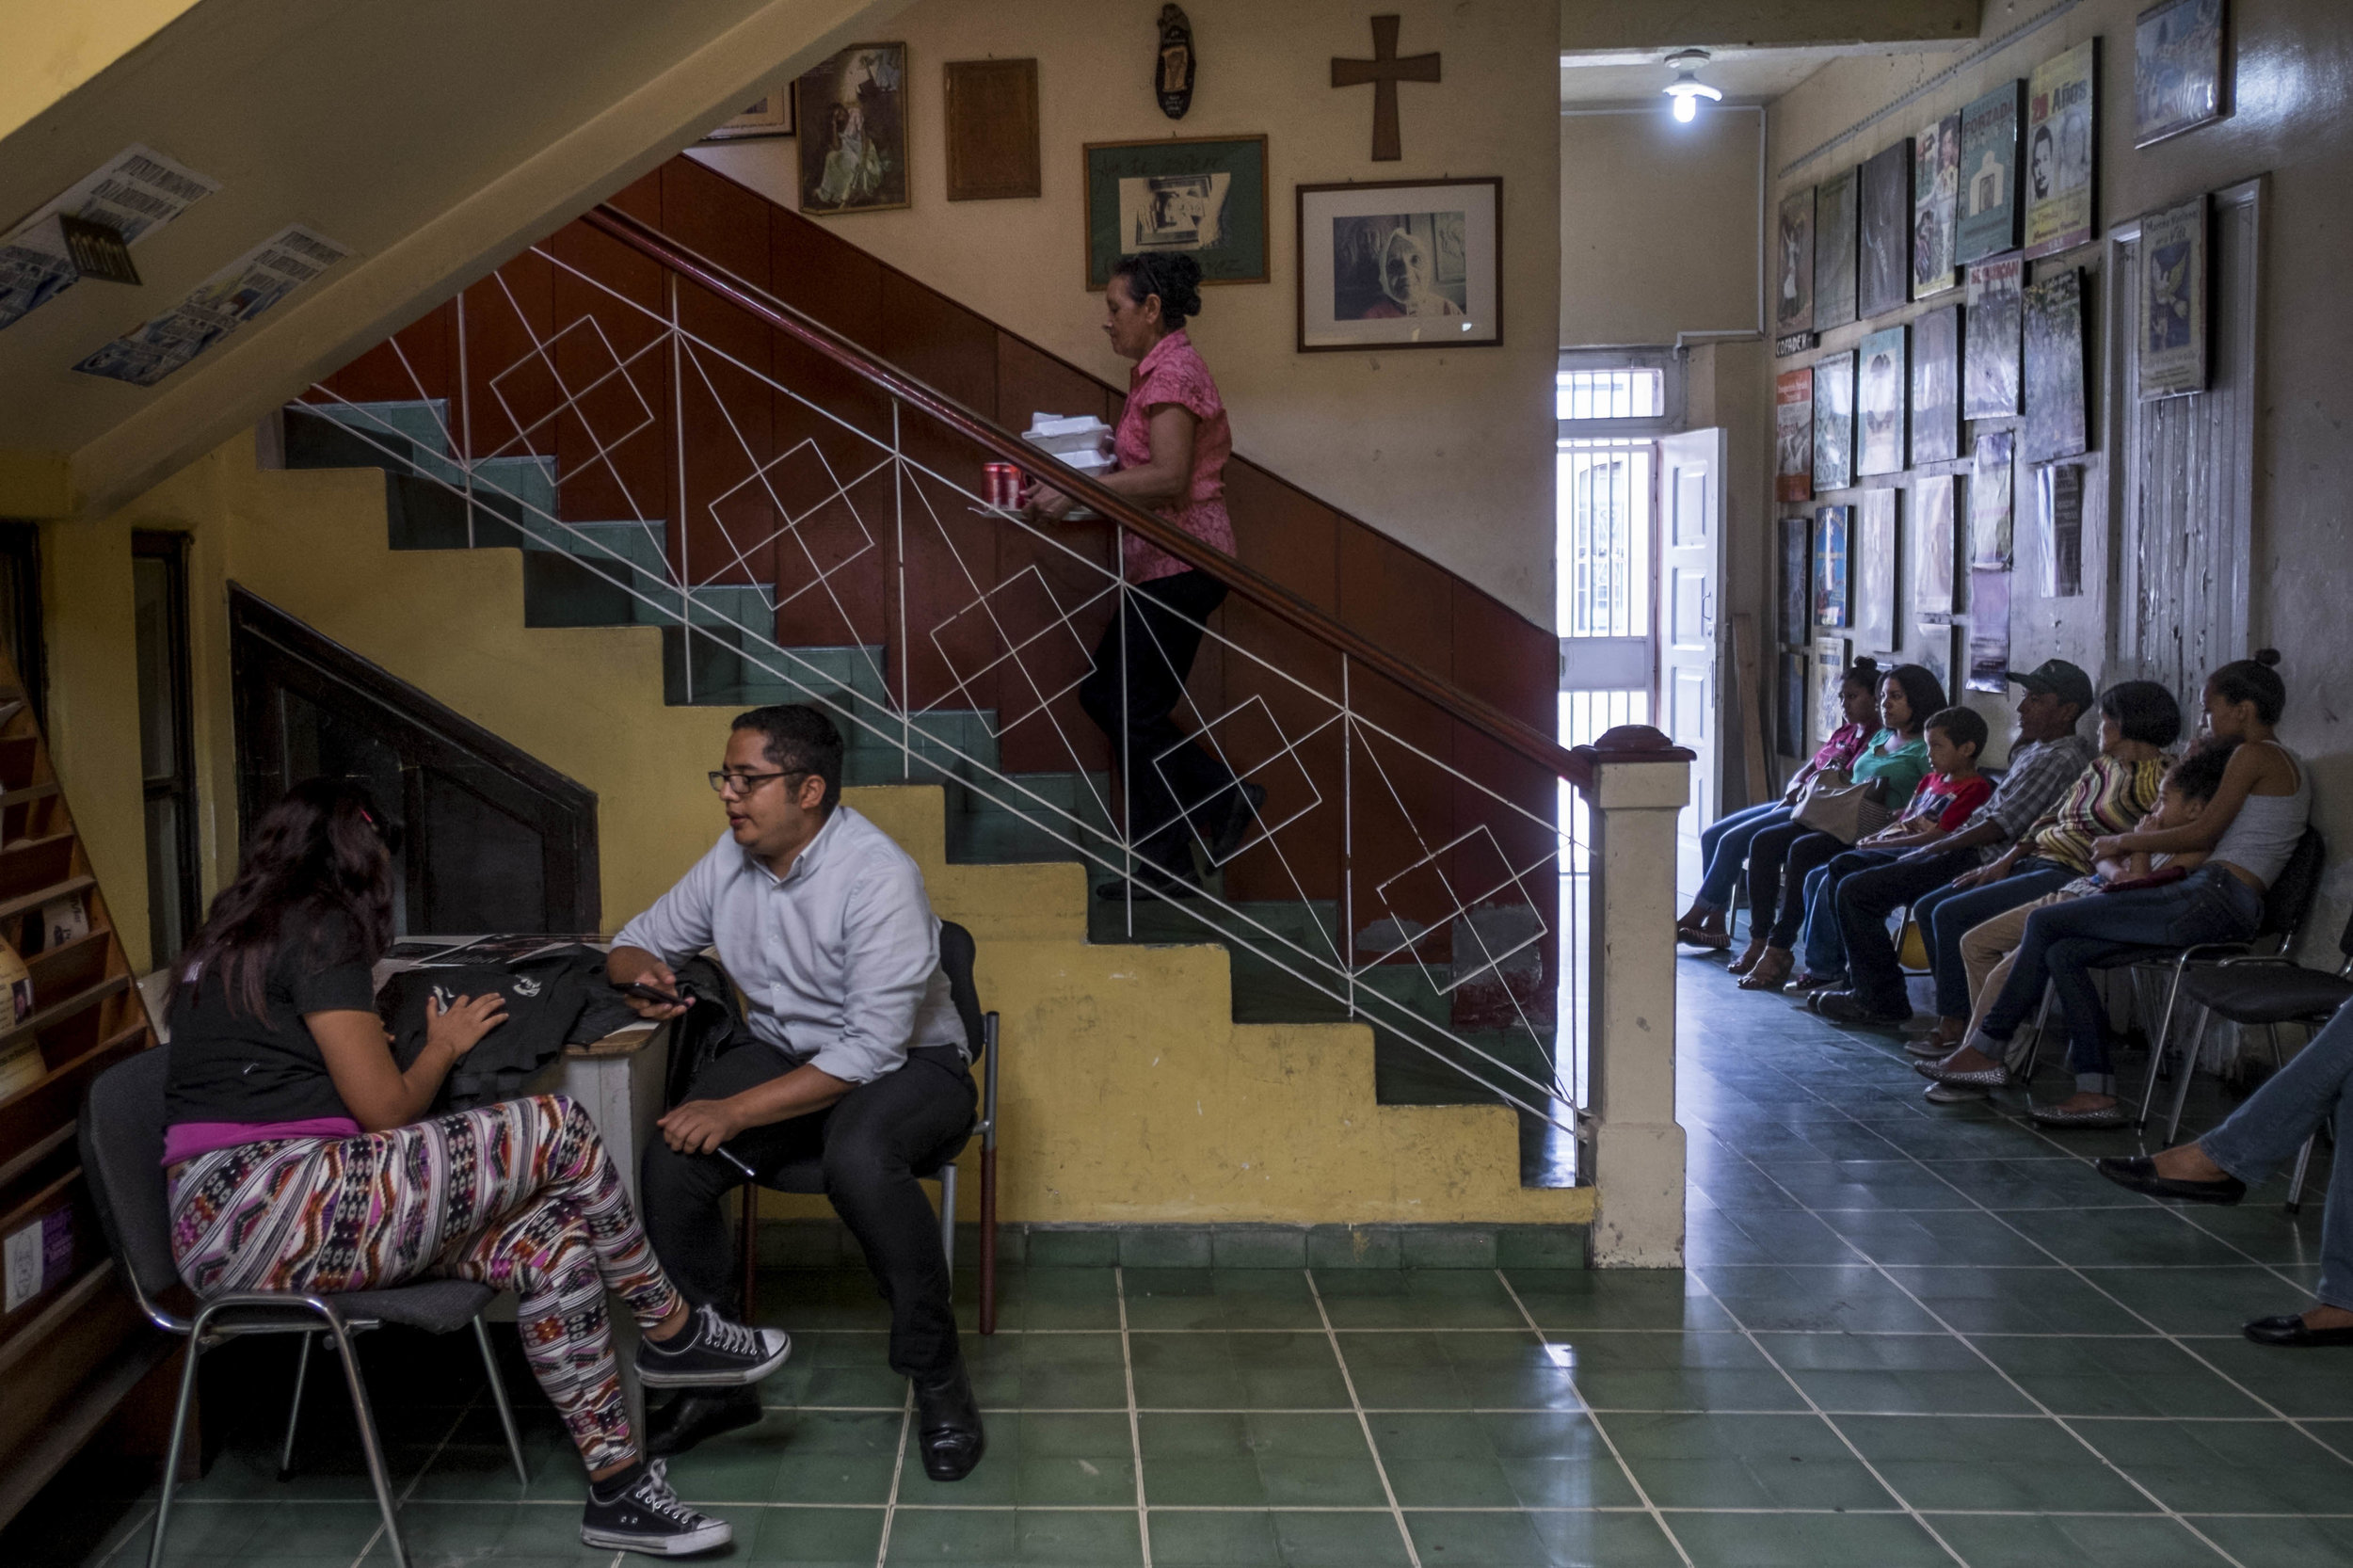  Inside the headquarters of COFADEH (Committee for Relatives of the Disappeared in Honduras), an organization that documents human rights violations, and works to help the relatives of victims of enforced disappearances and assassinations. 